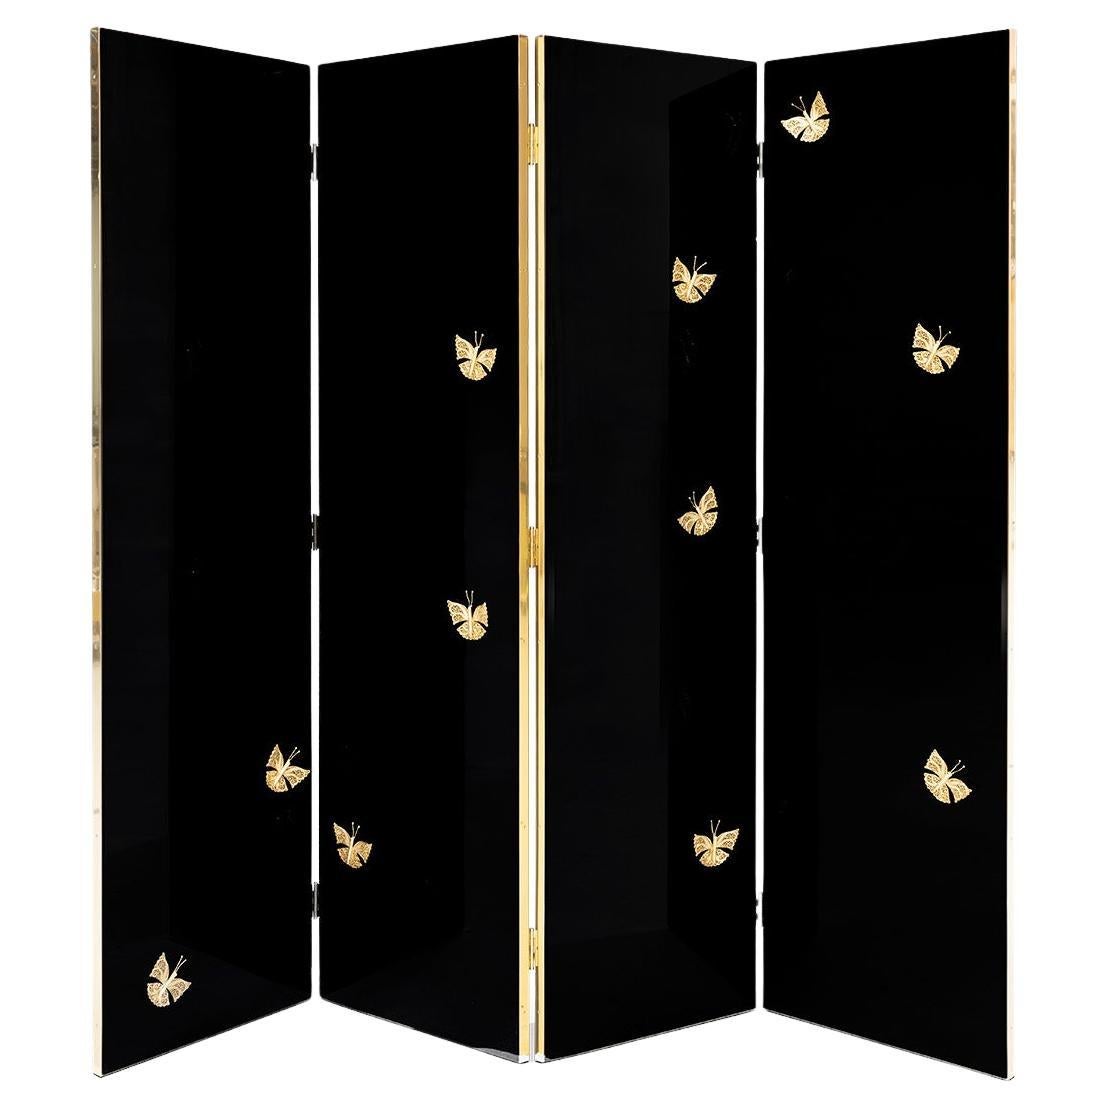 Euphoria Screen with Filifree Butterflies and Metal Frame For Sale